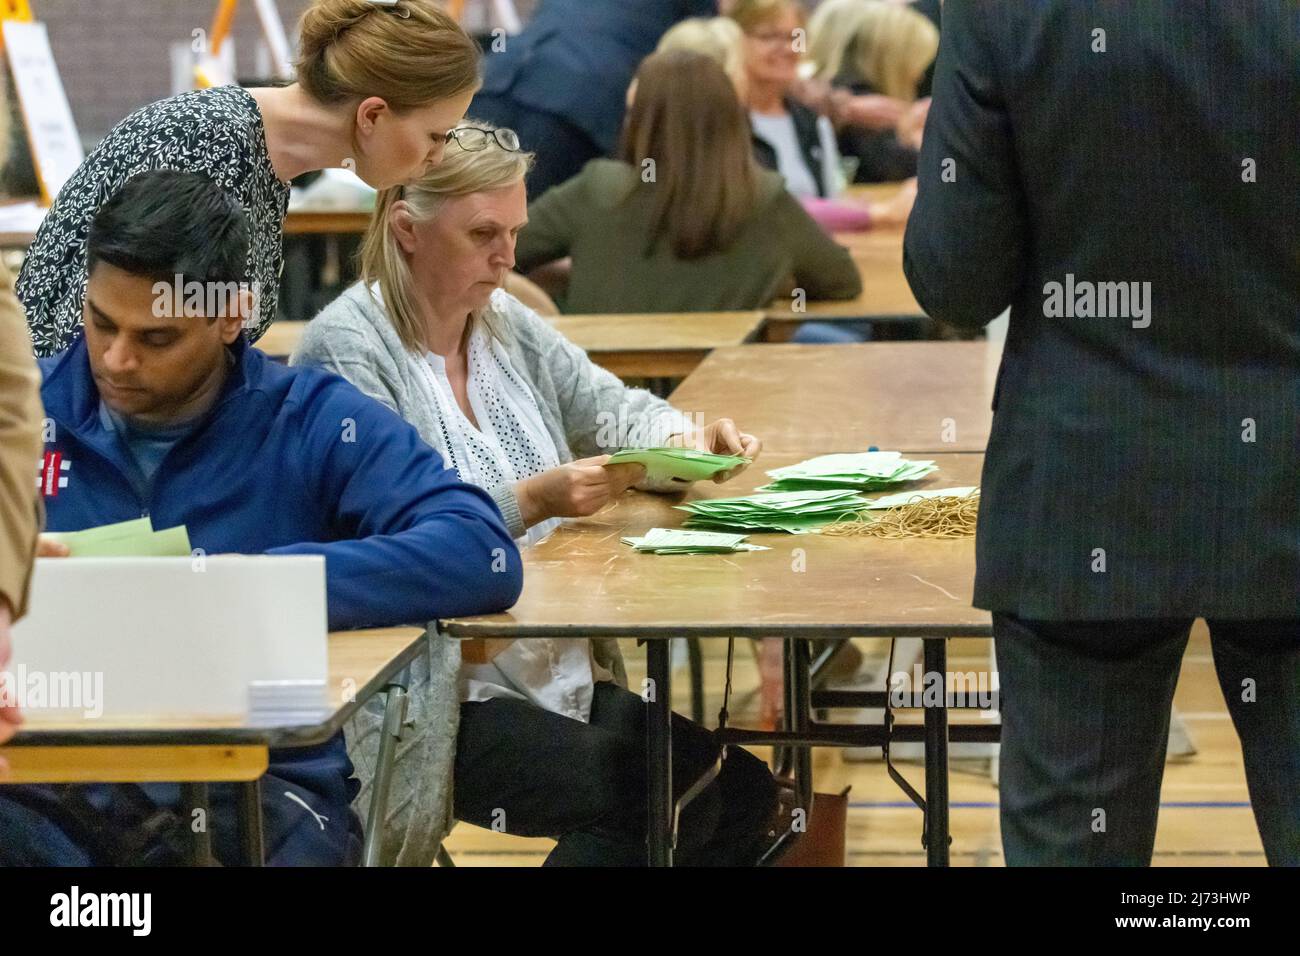 Brentwood Essex 6th May 2022 Brentwood borough council Local election count at the Brentwood Centre, Brentwood Essex Credit Ian DavidsonAlamy Live News Stock Photo